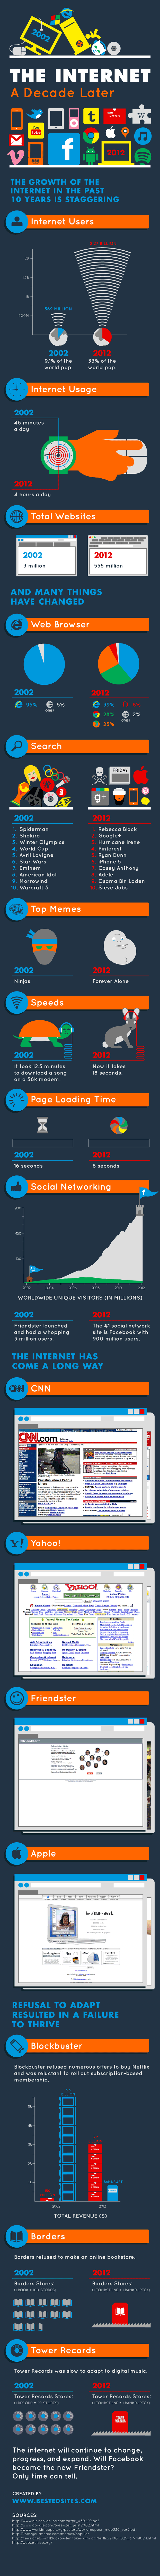 The Internet - A Decade Later.